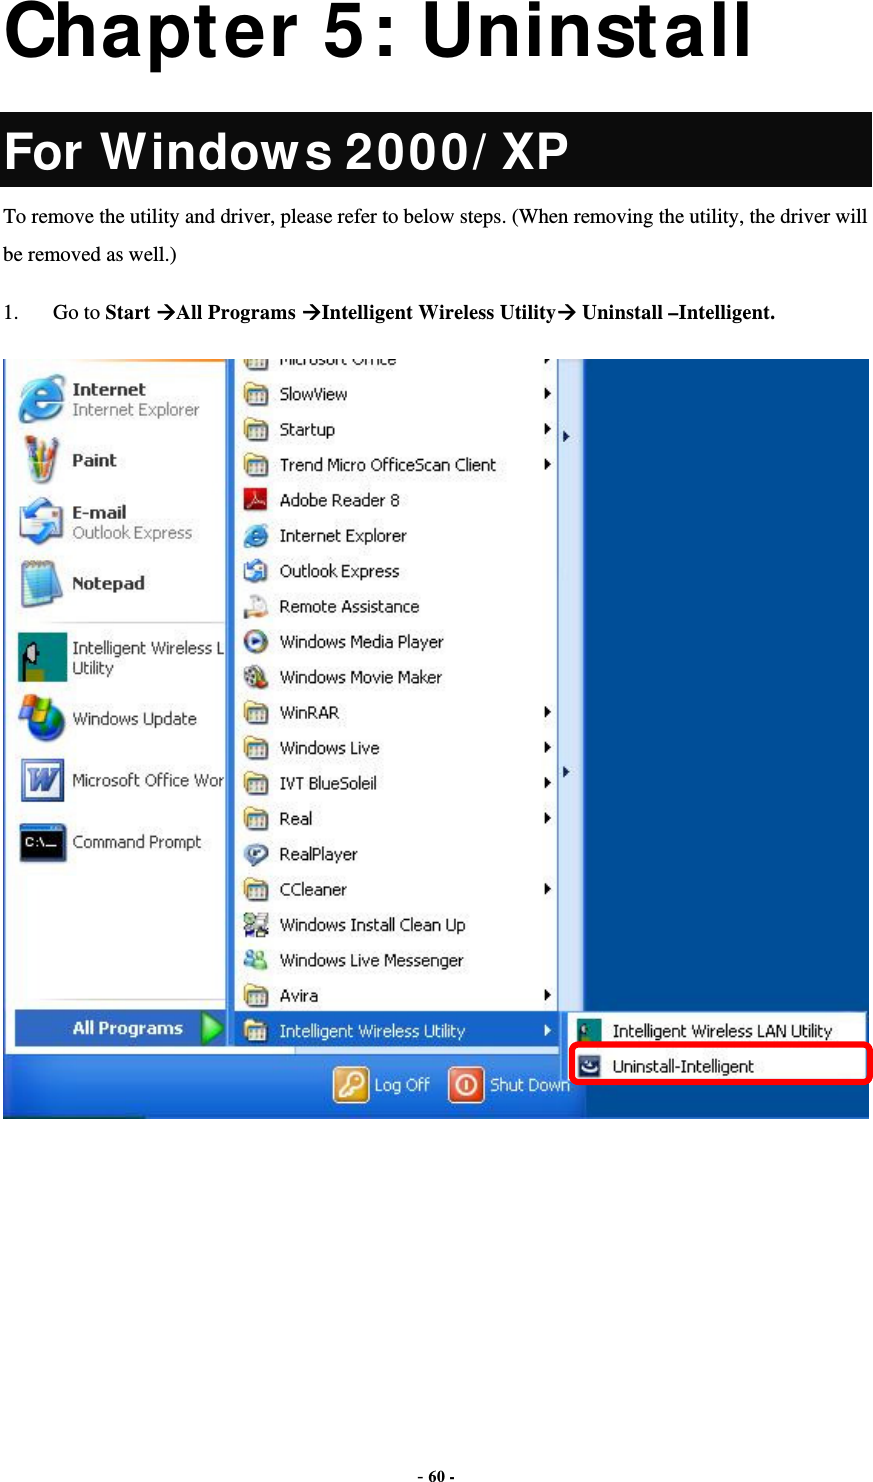  - 60 -  Chapter 5: Uninstall For Windows 2000/XP To remove the utility and driver, please refer to below steps. (When removing the utility, the driver will be removed as well.) 1. Go to Start All Programs Intelligent Wireless Utility Uninstall –Intelligent.  